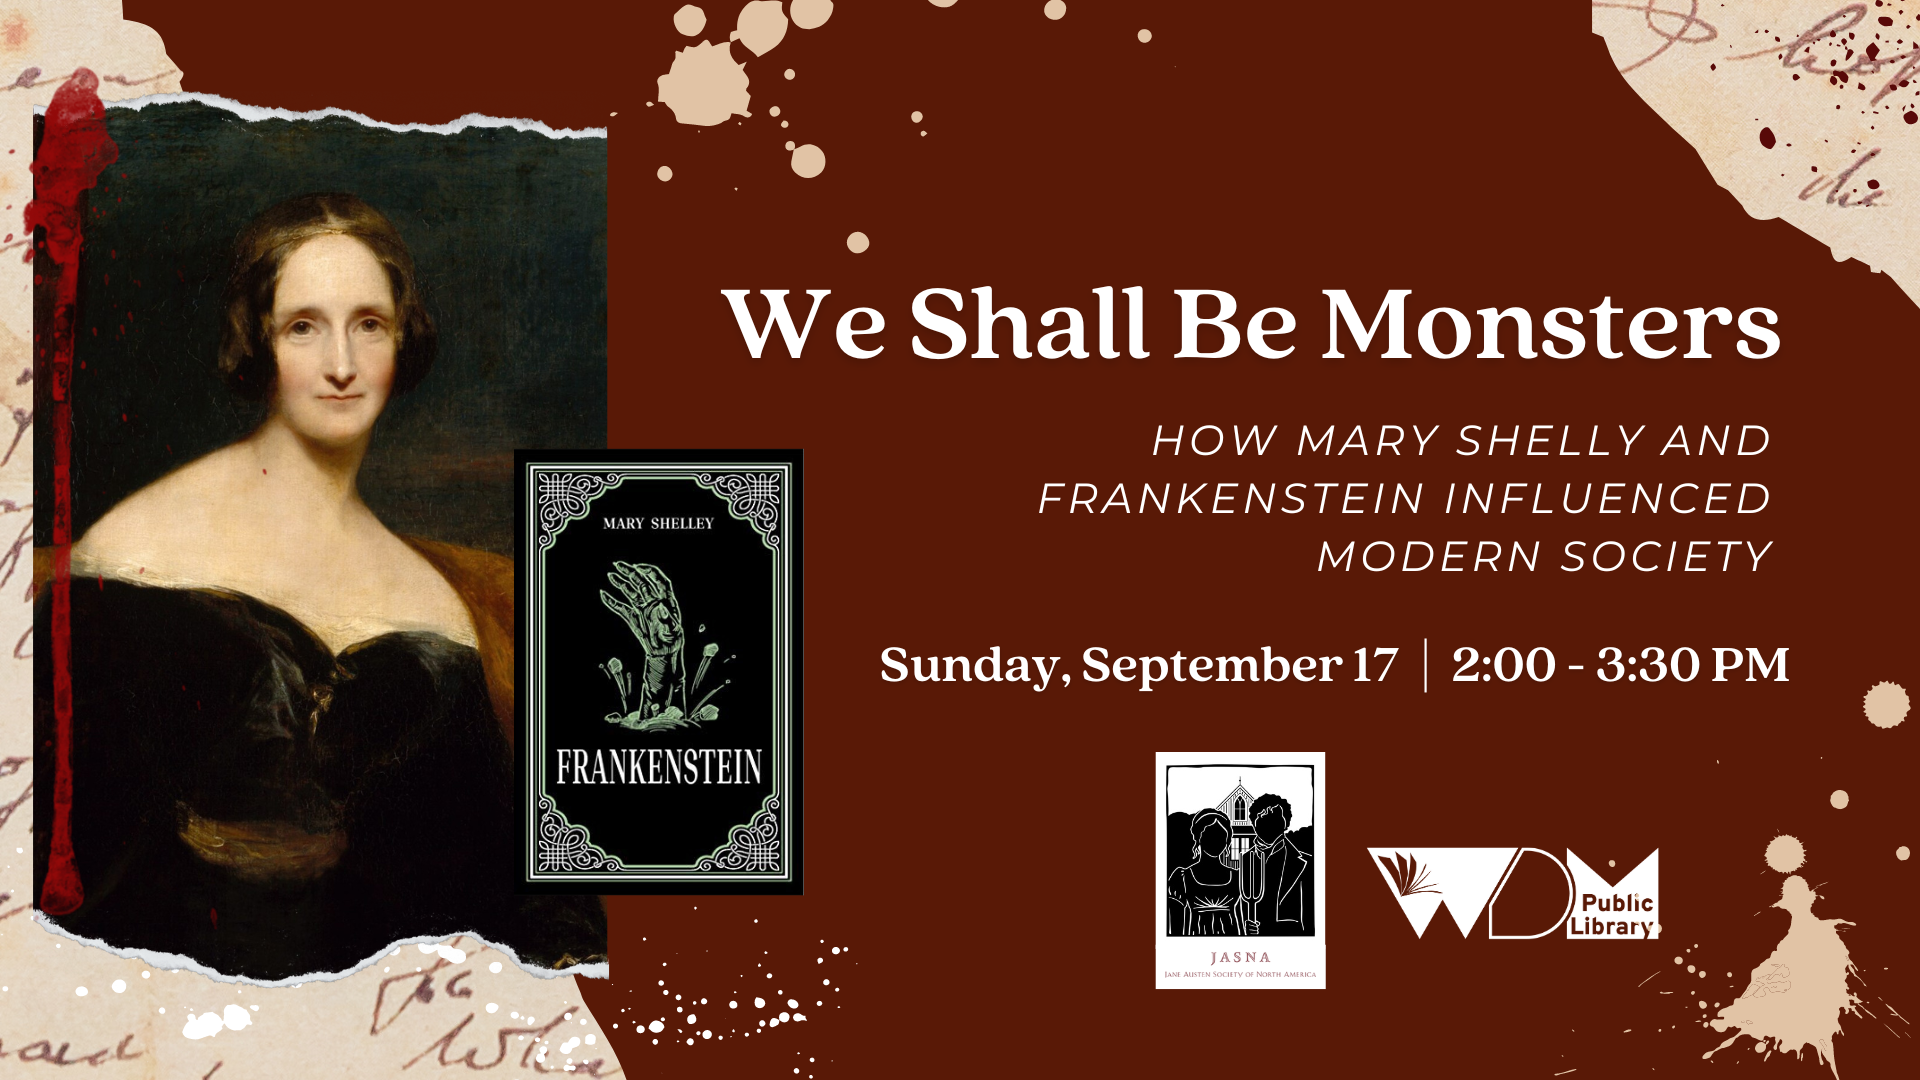 image of Mary Shelley; logos for JAS and WDM Library; date/time of program